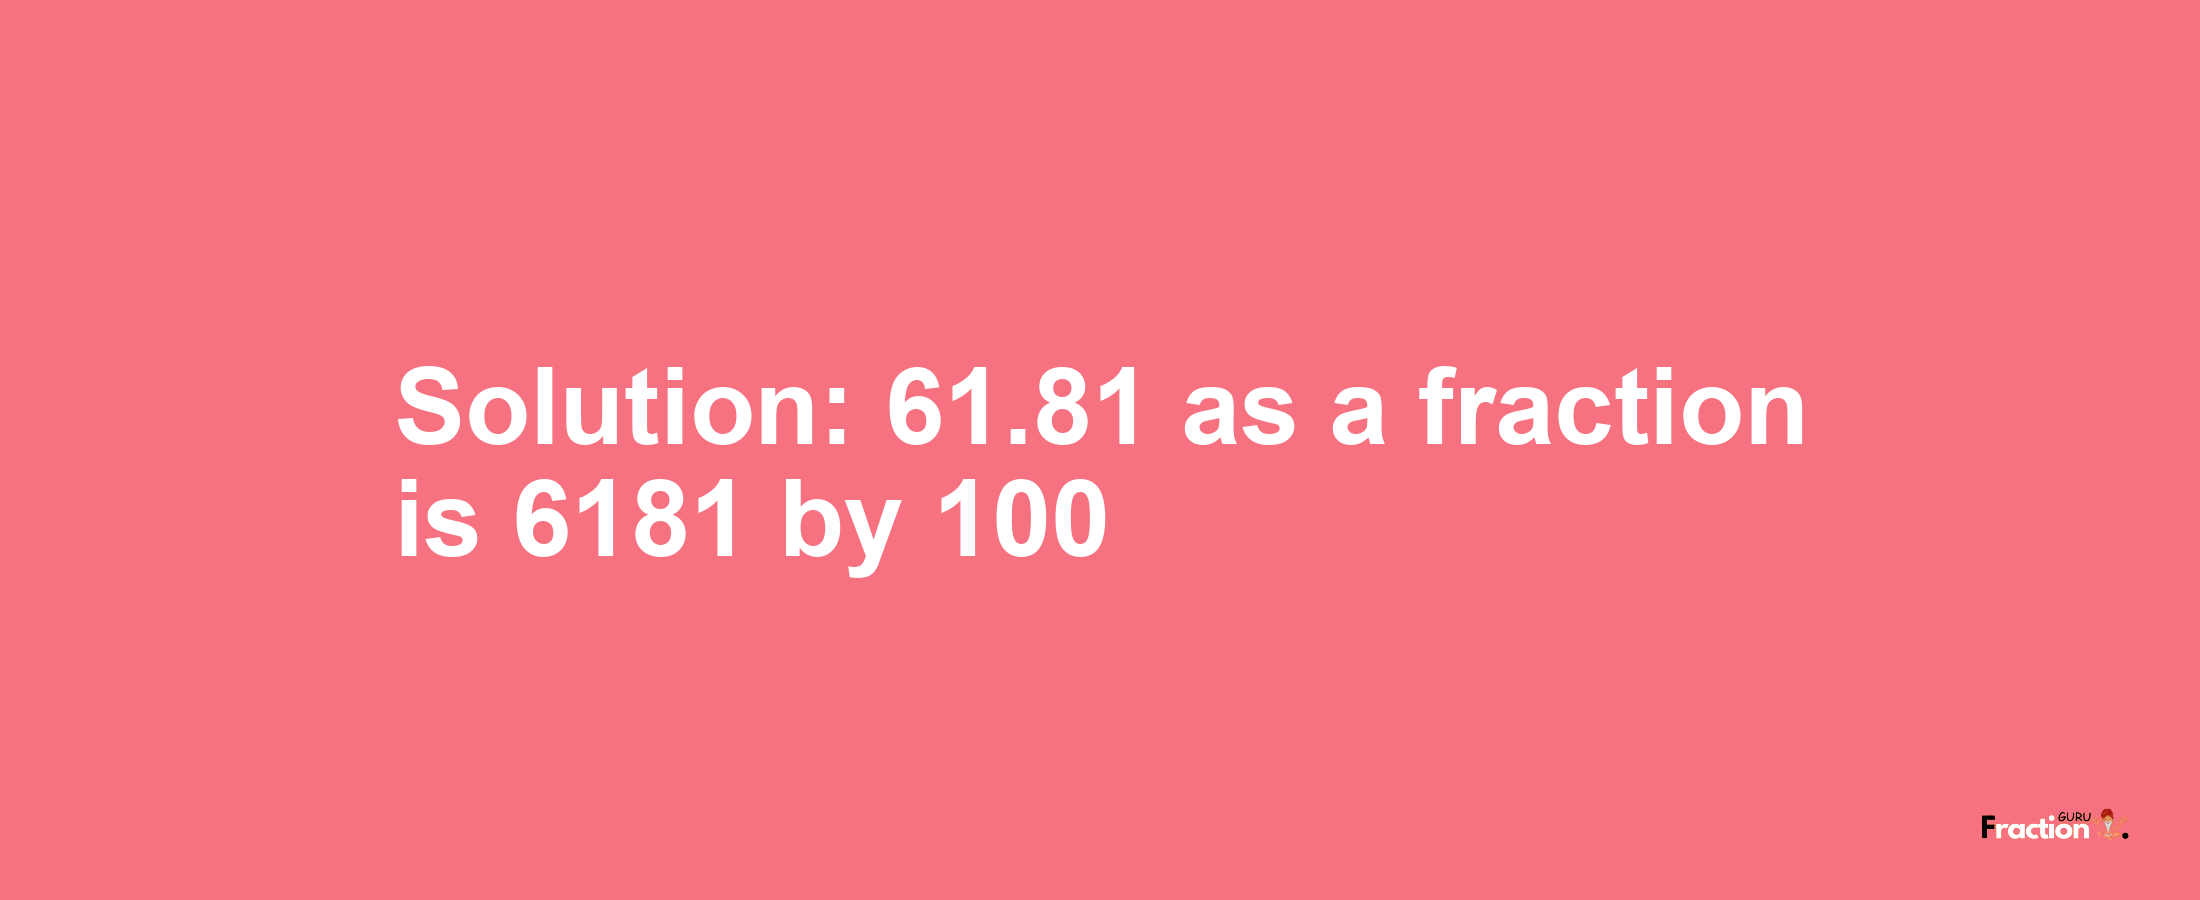 Solution:61.81 as a fraction is 6181/100